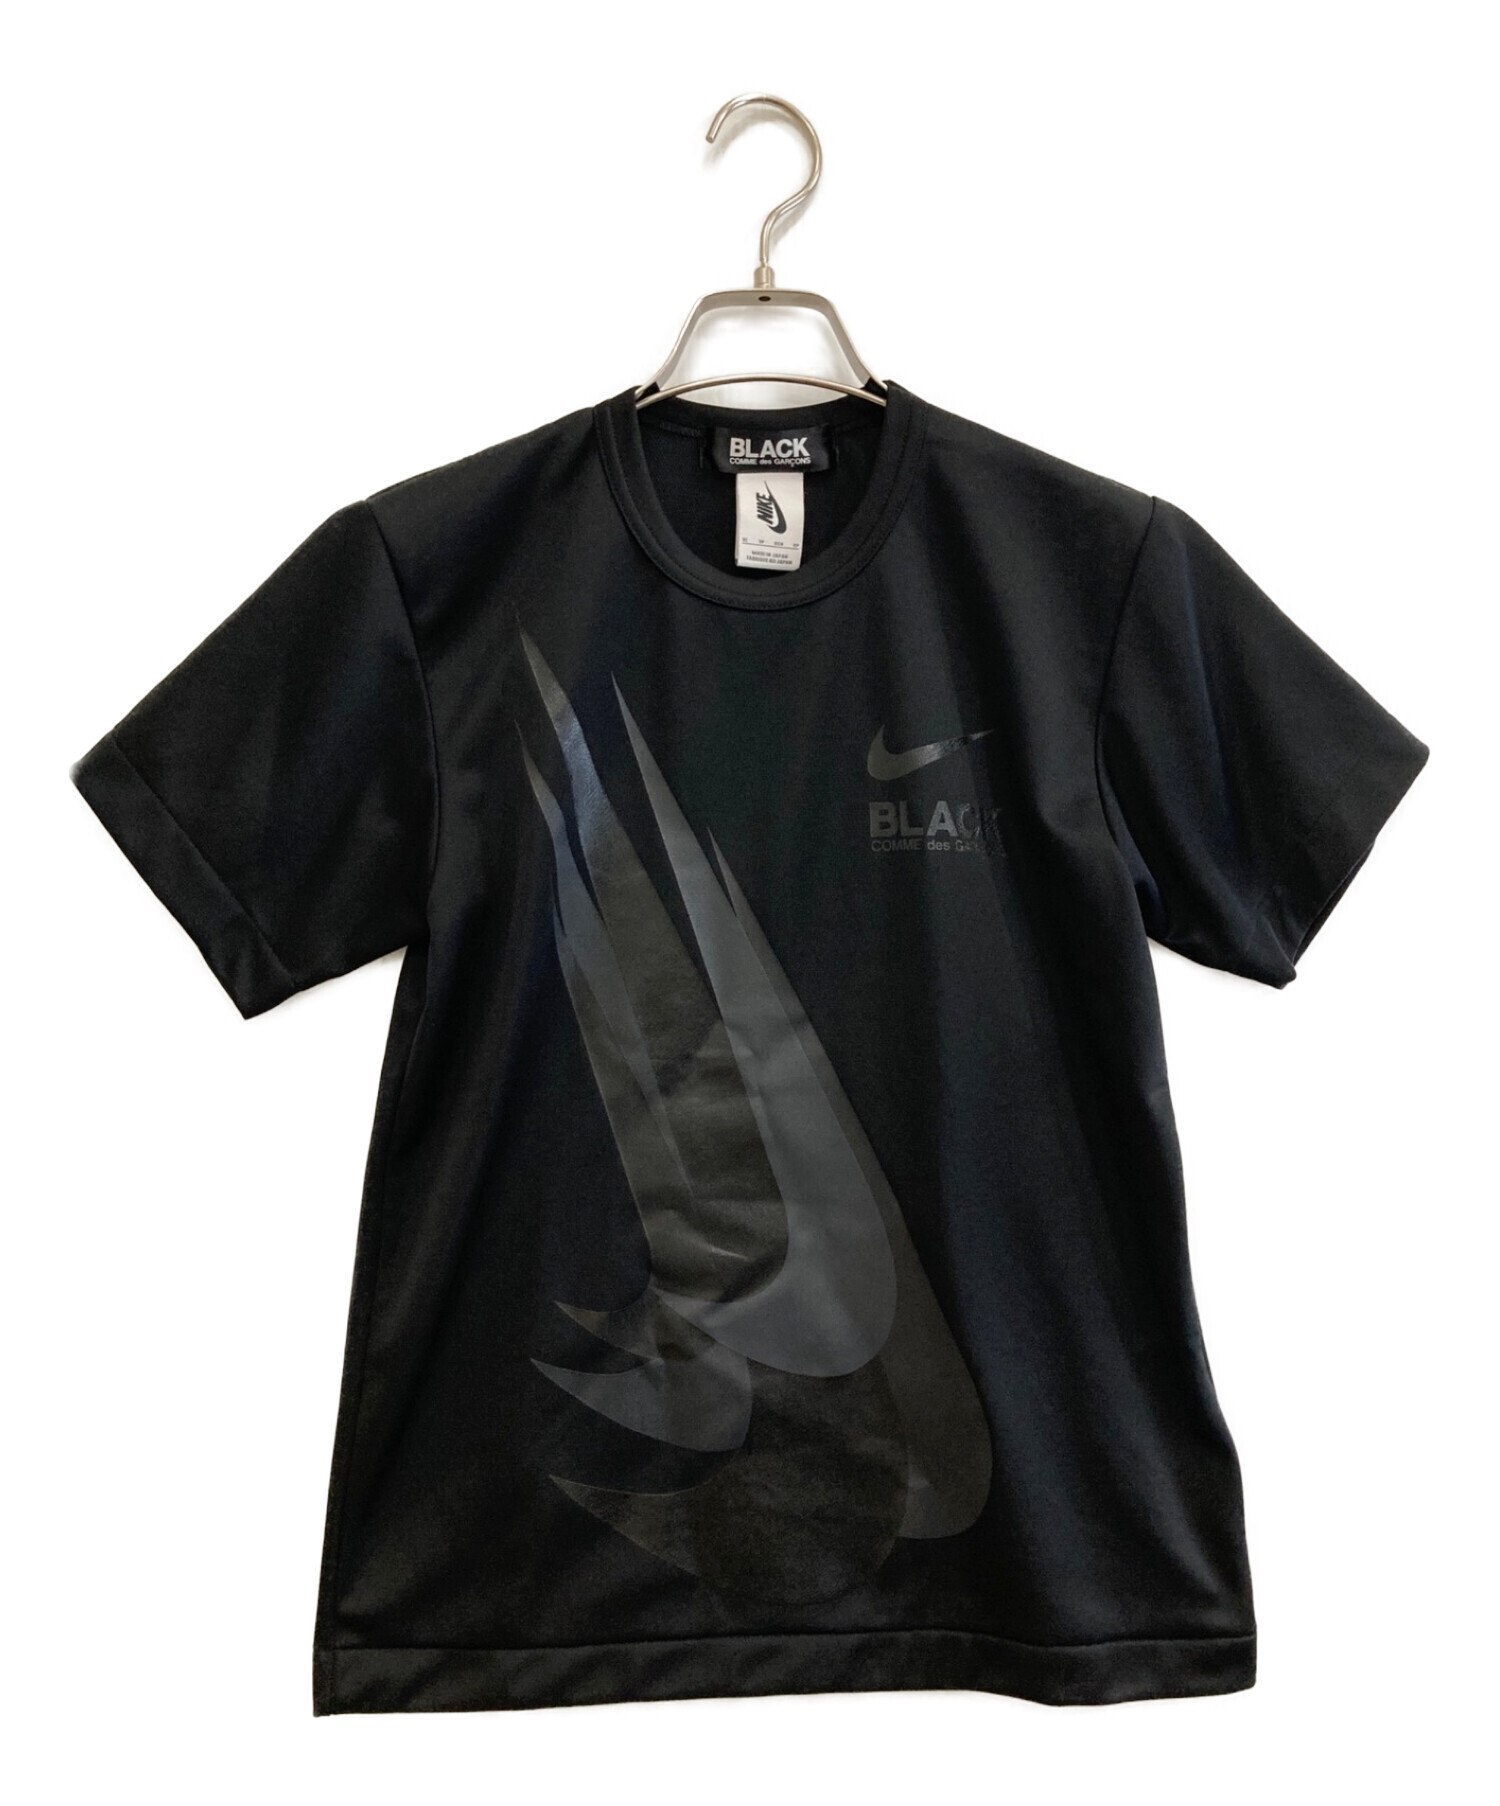 COMME des GARCONS NIKE Tシャツメンズ